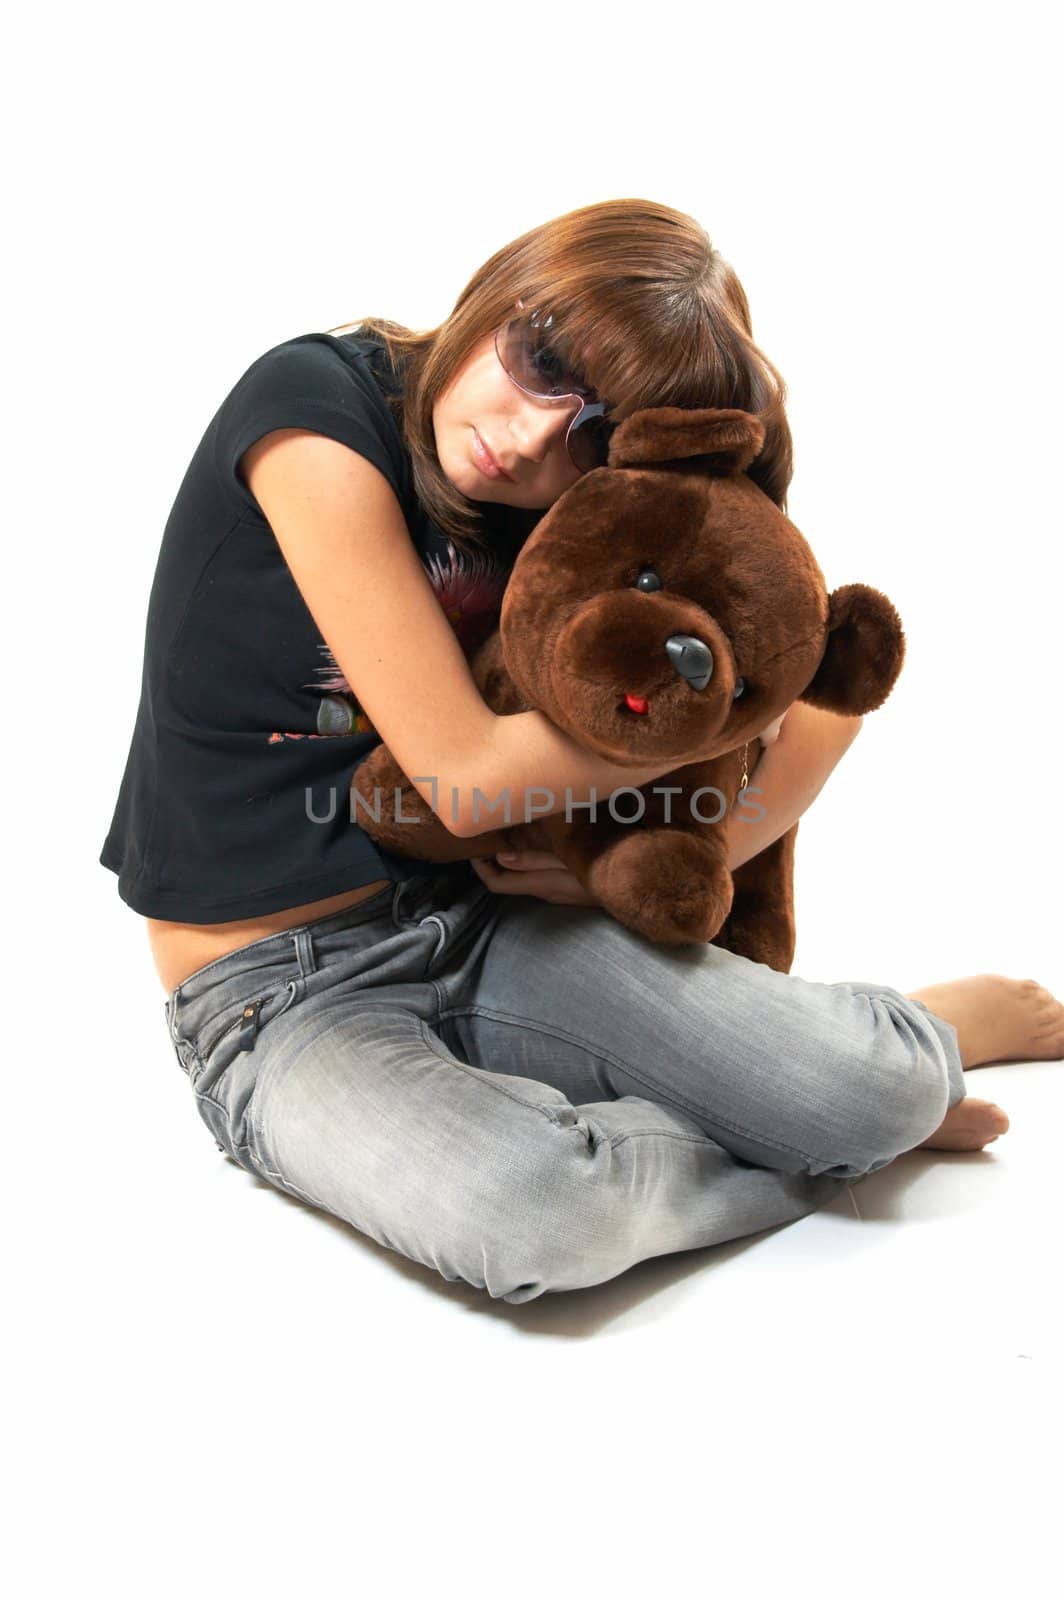 The girl with the teddy bear on a white background 